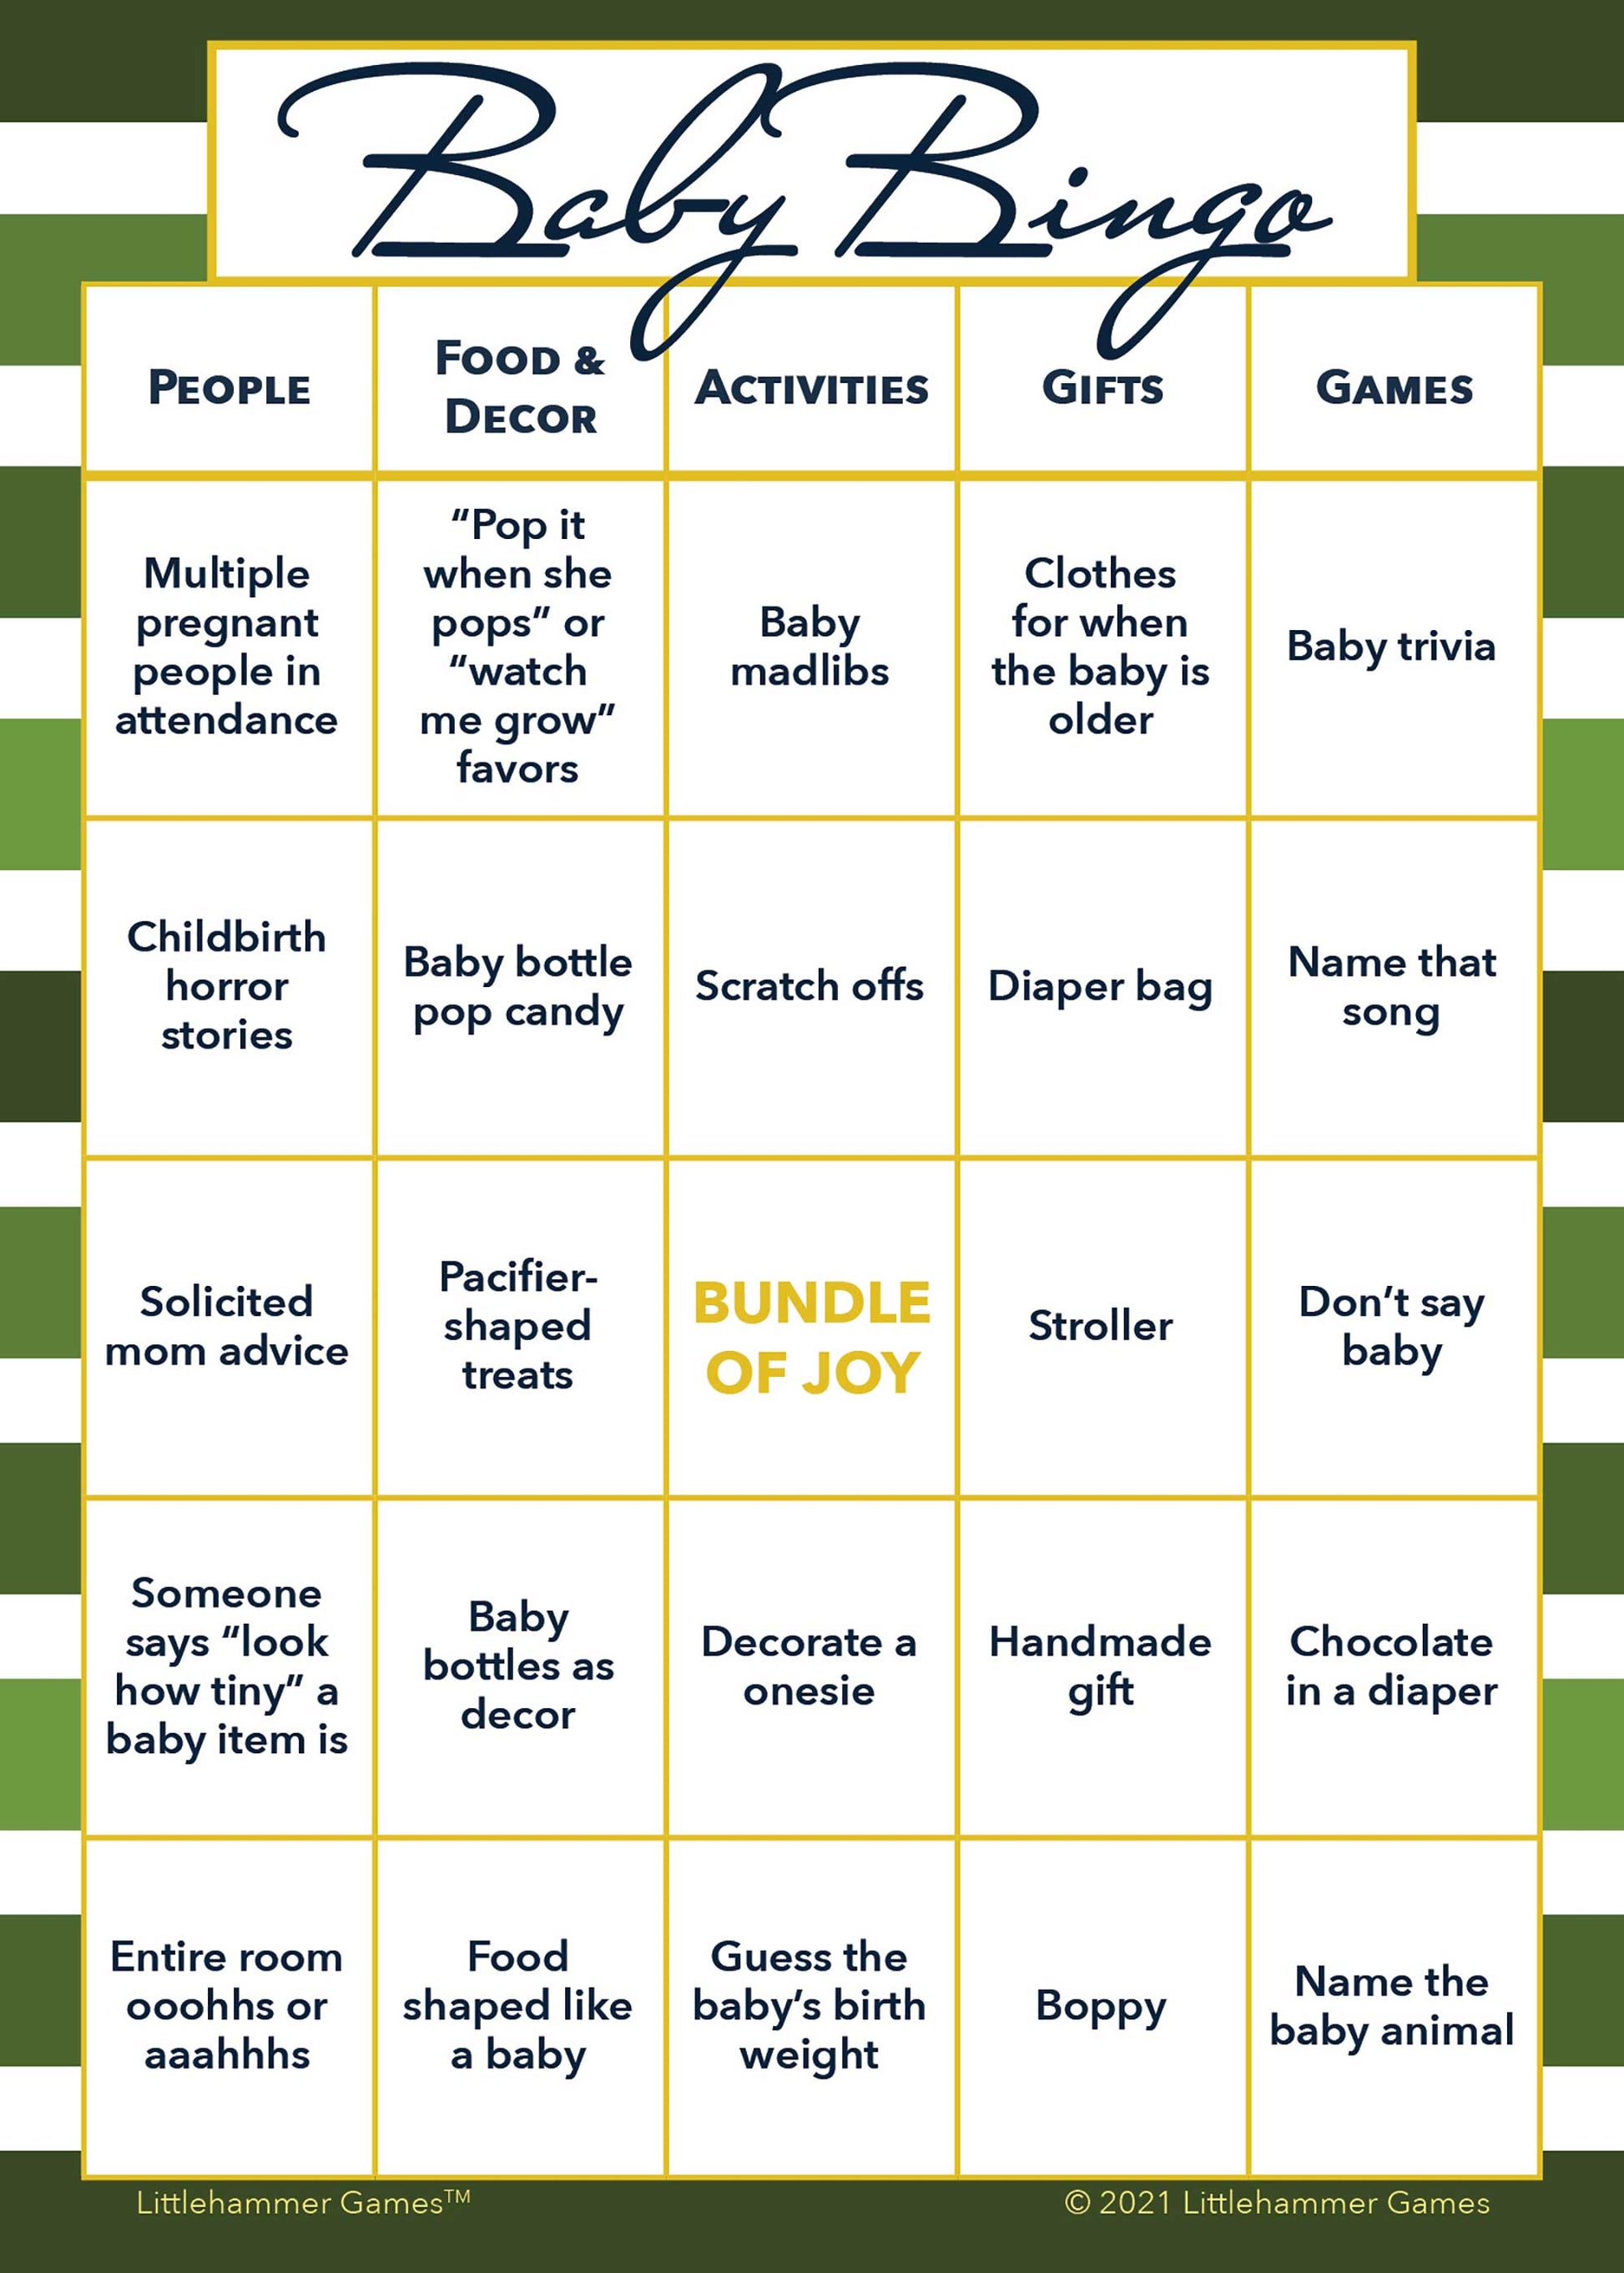 Baby Bingo game card on a green-striped background